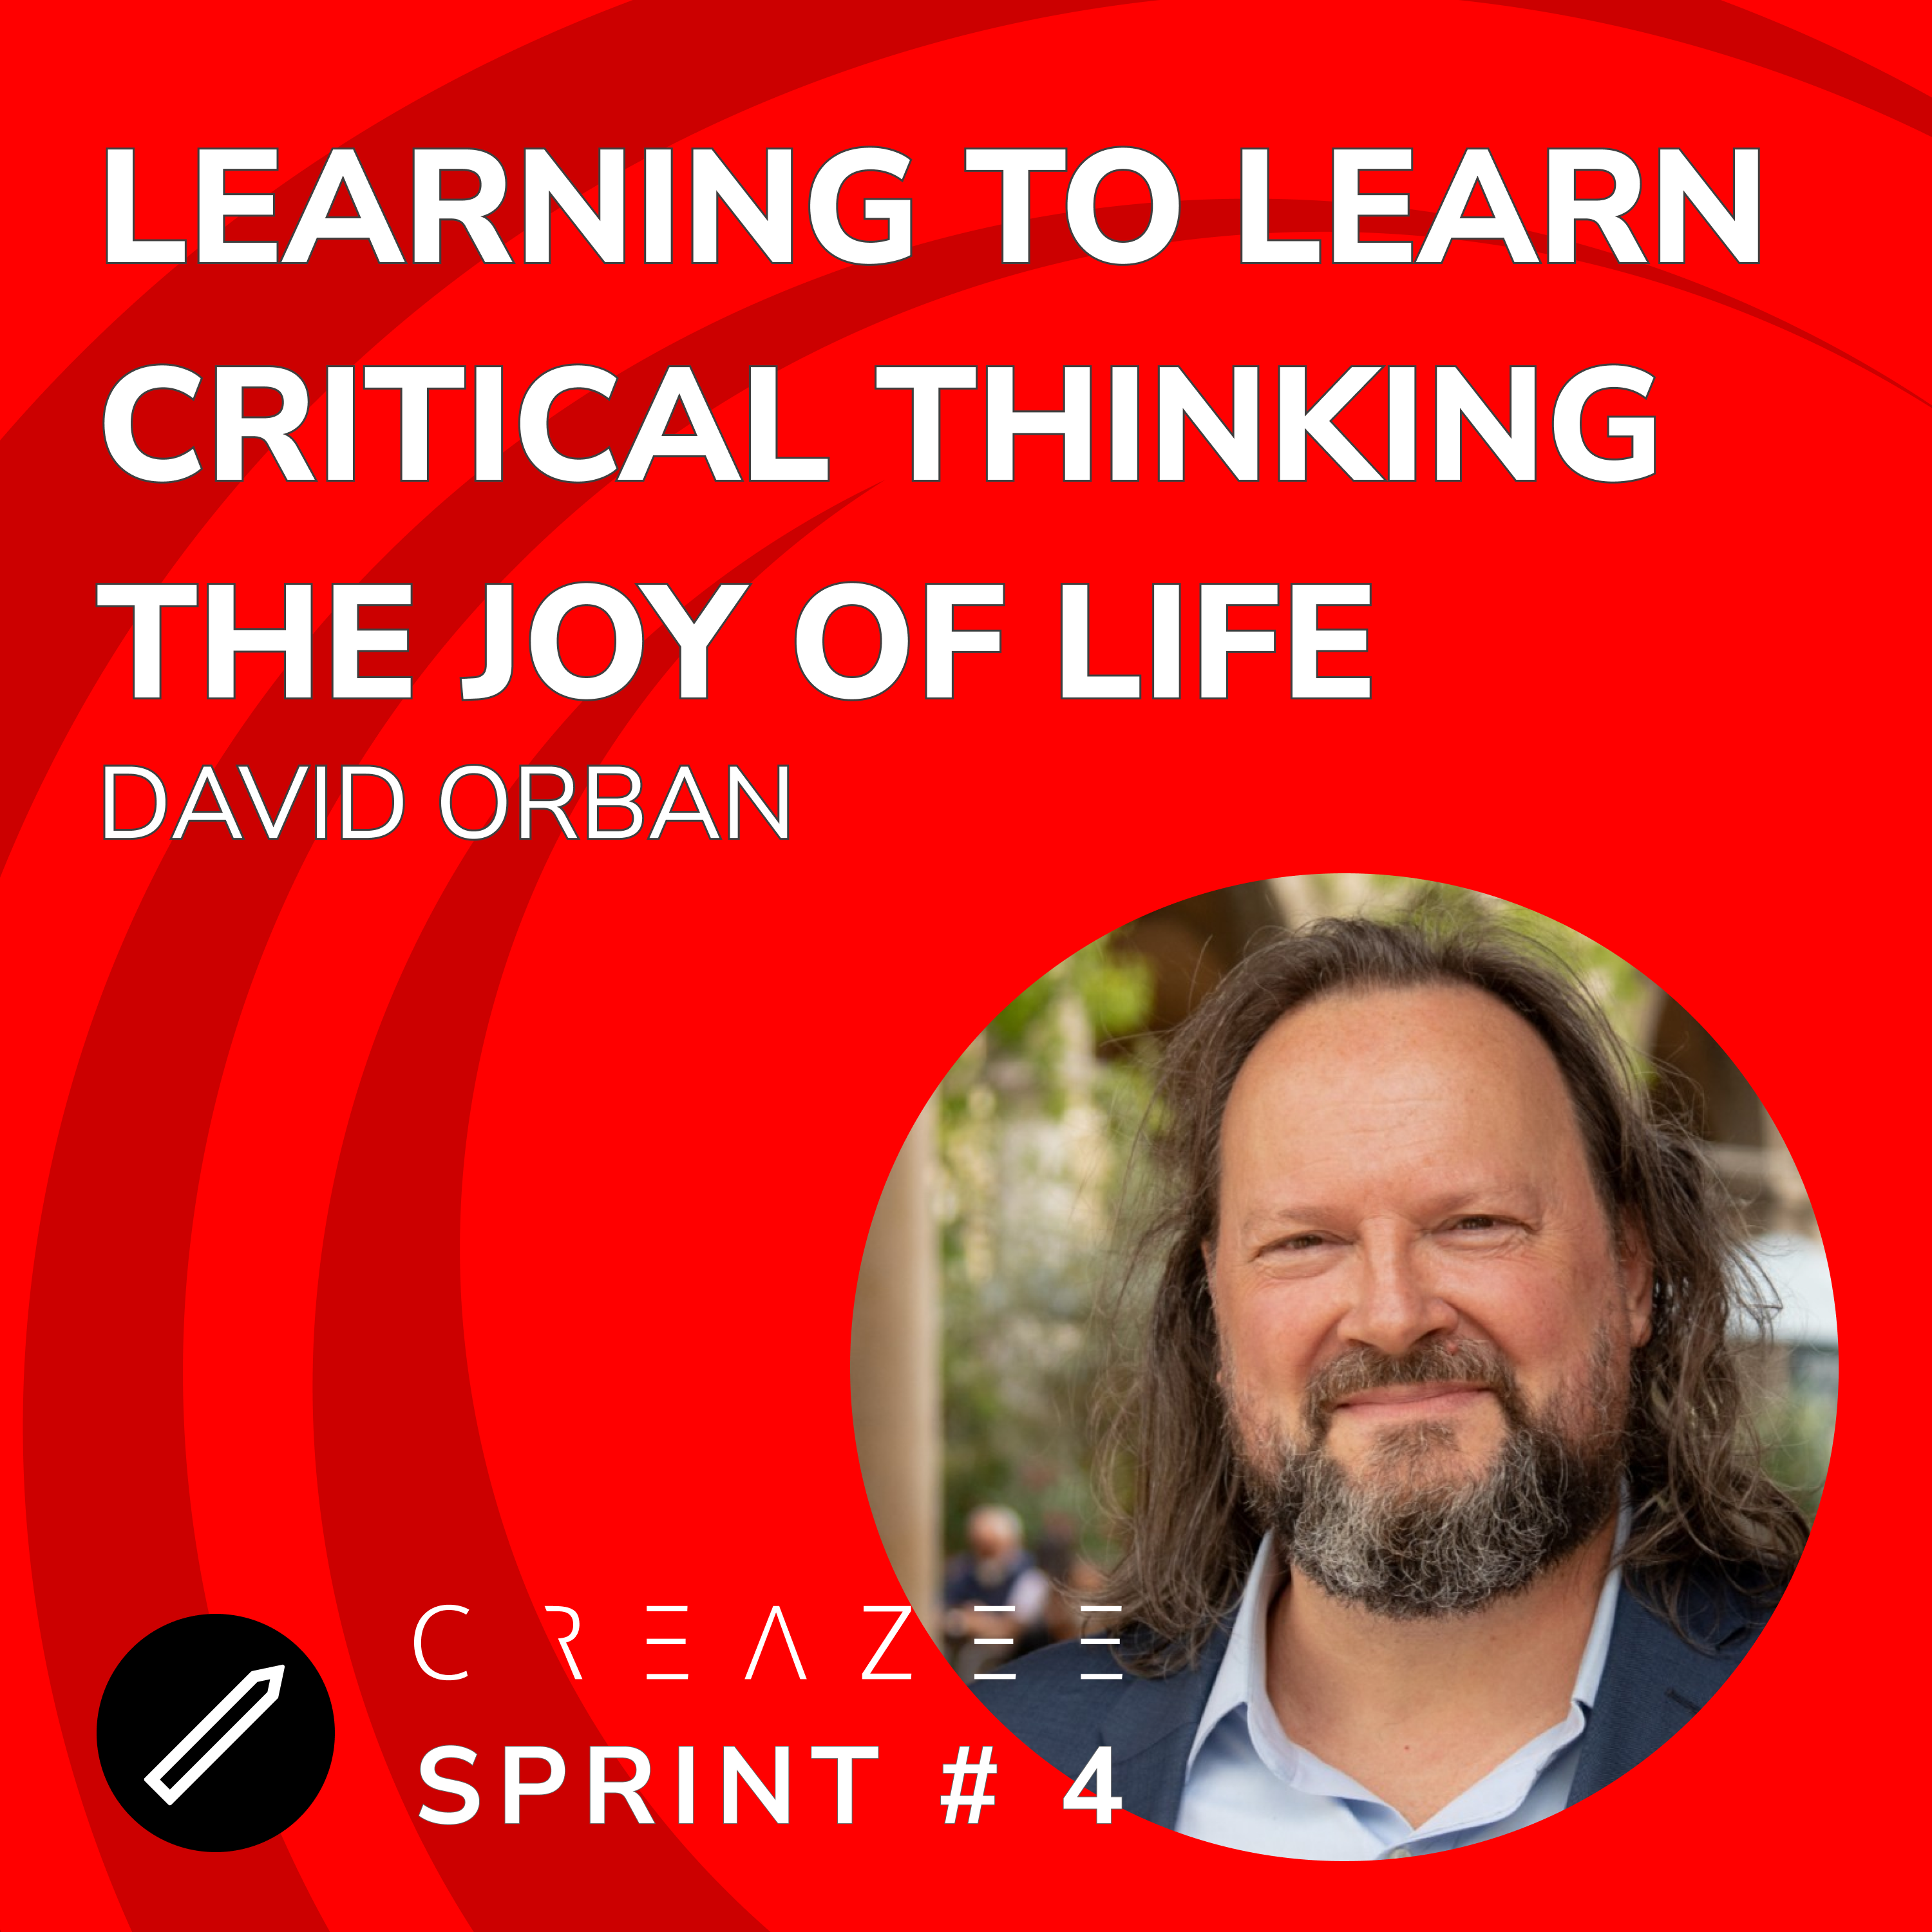 Building confidence with deliberate practice, a CREAZEE Sprint with David Orban